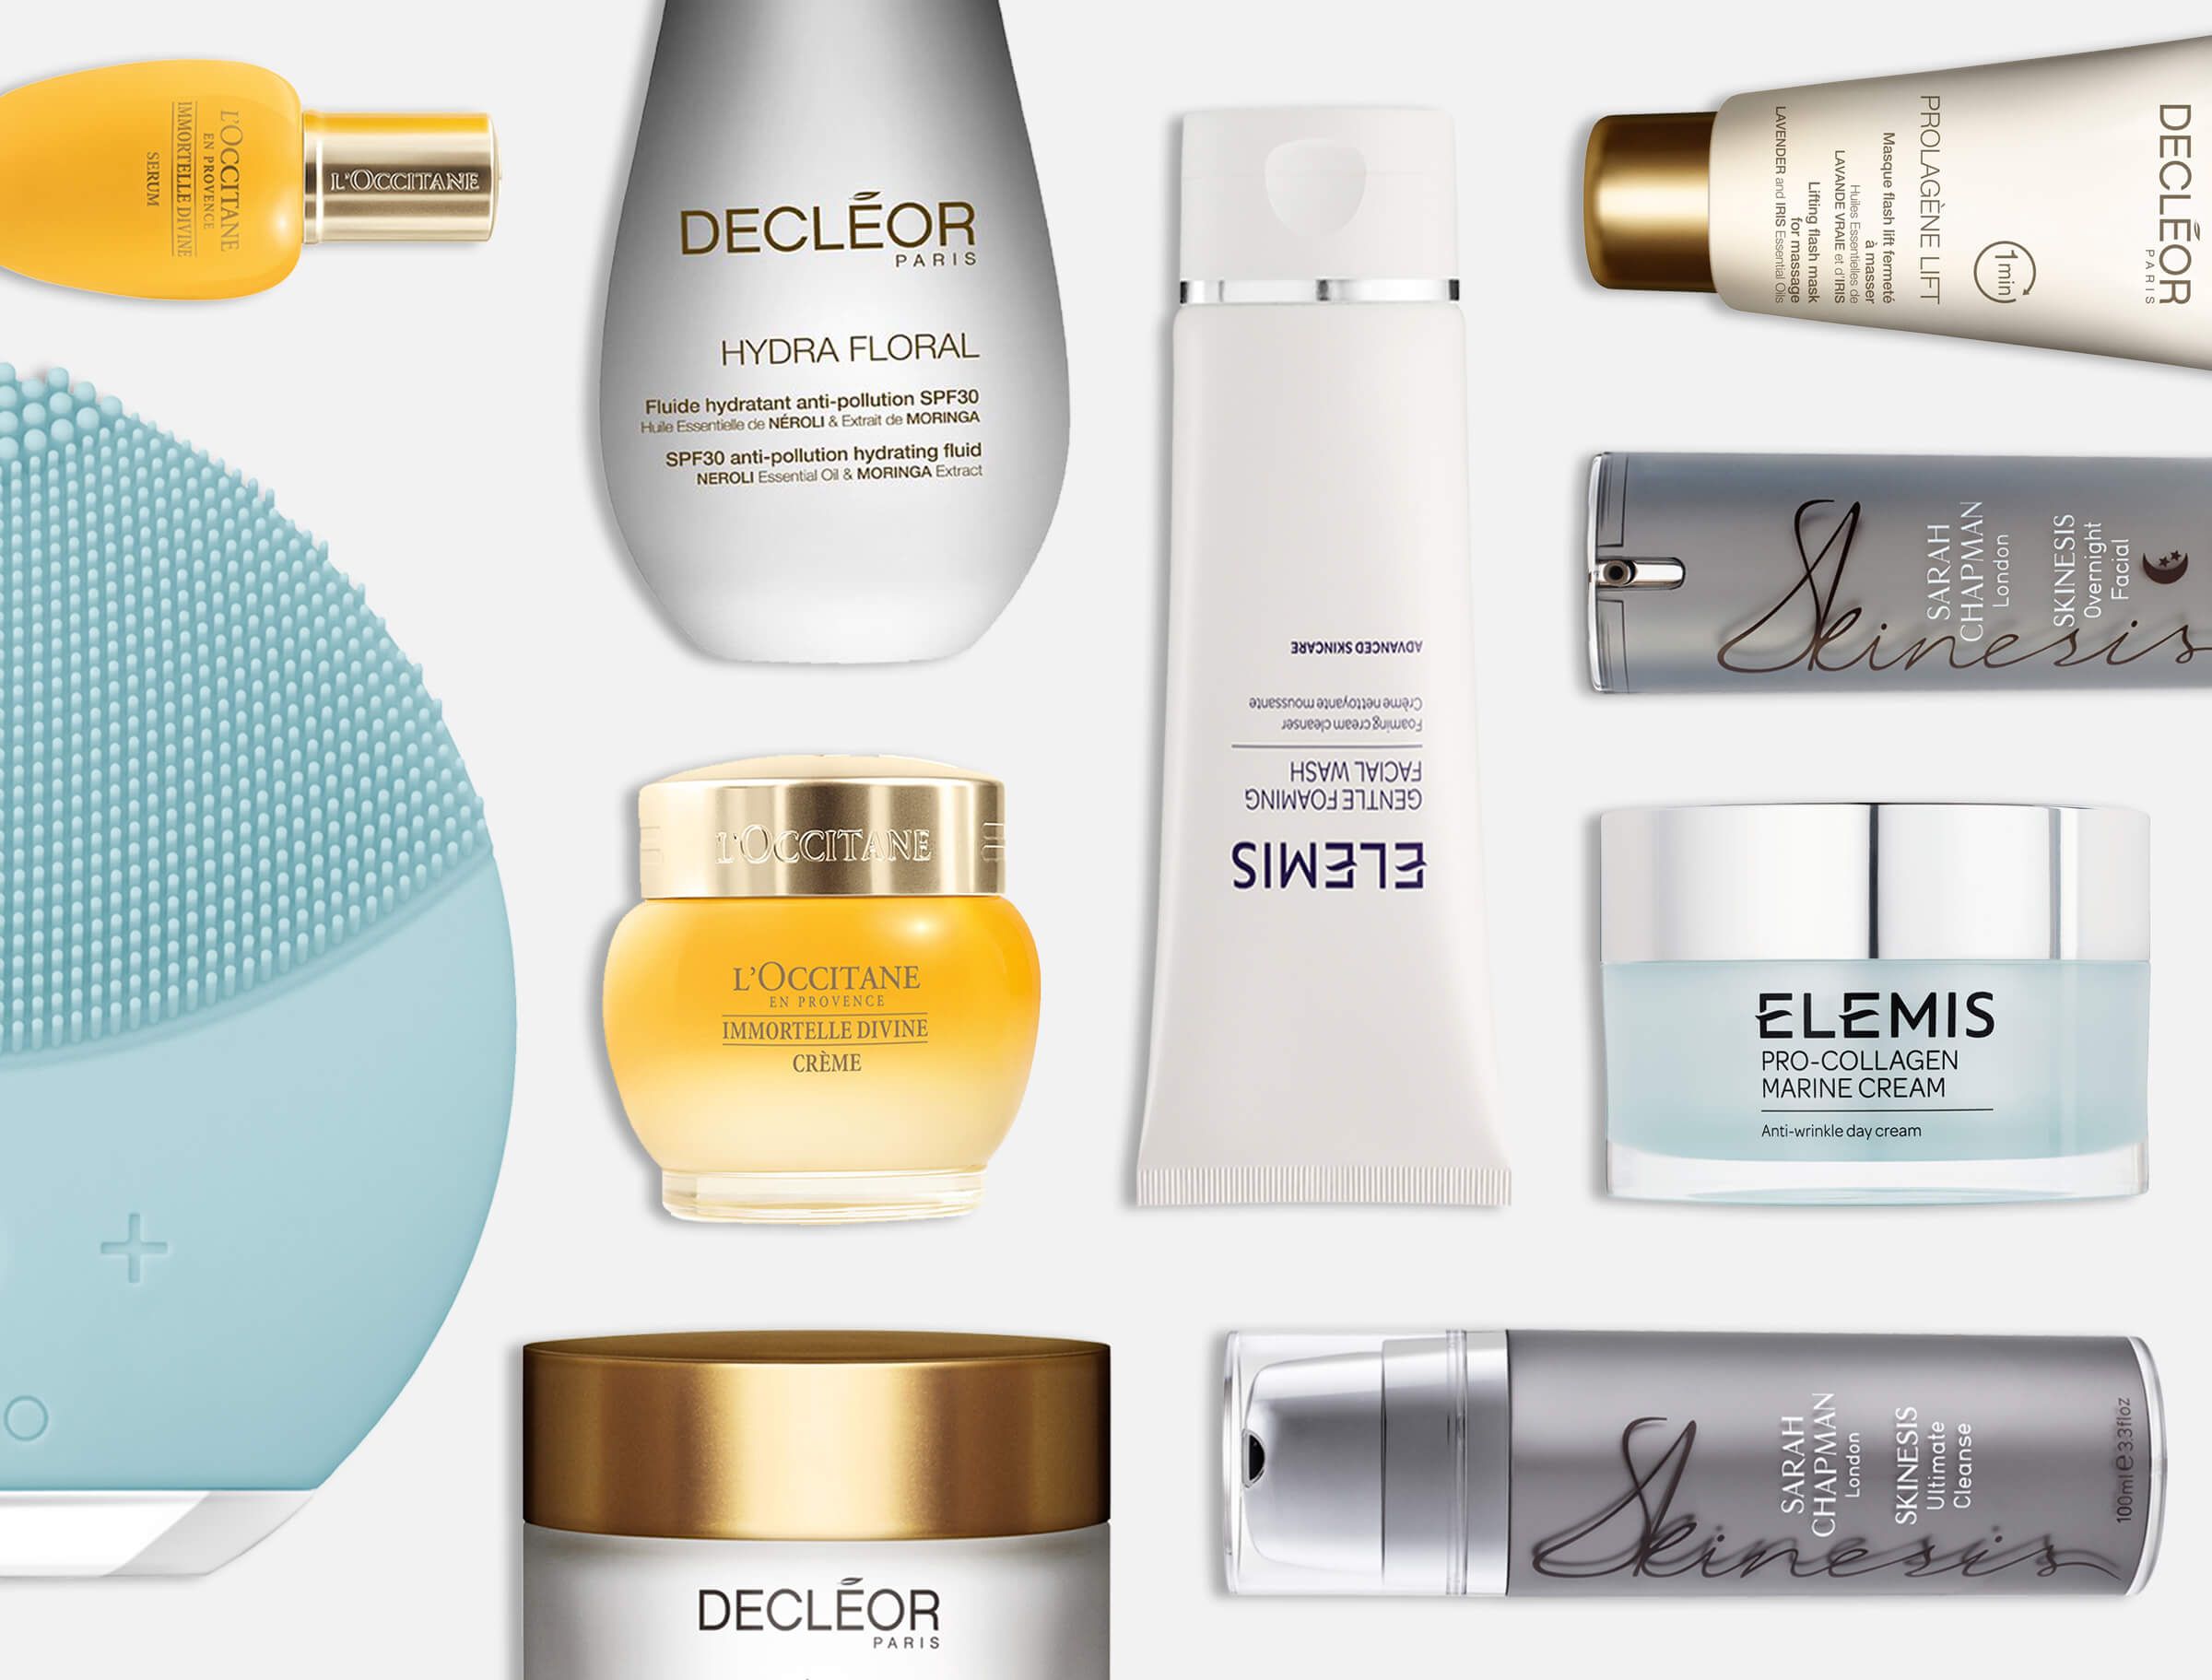 Products for the perfect at-home facial